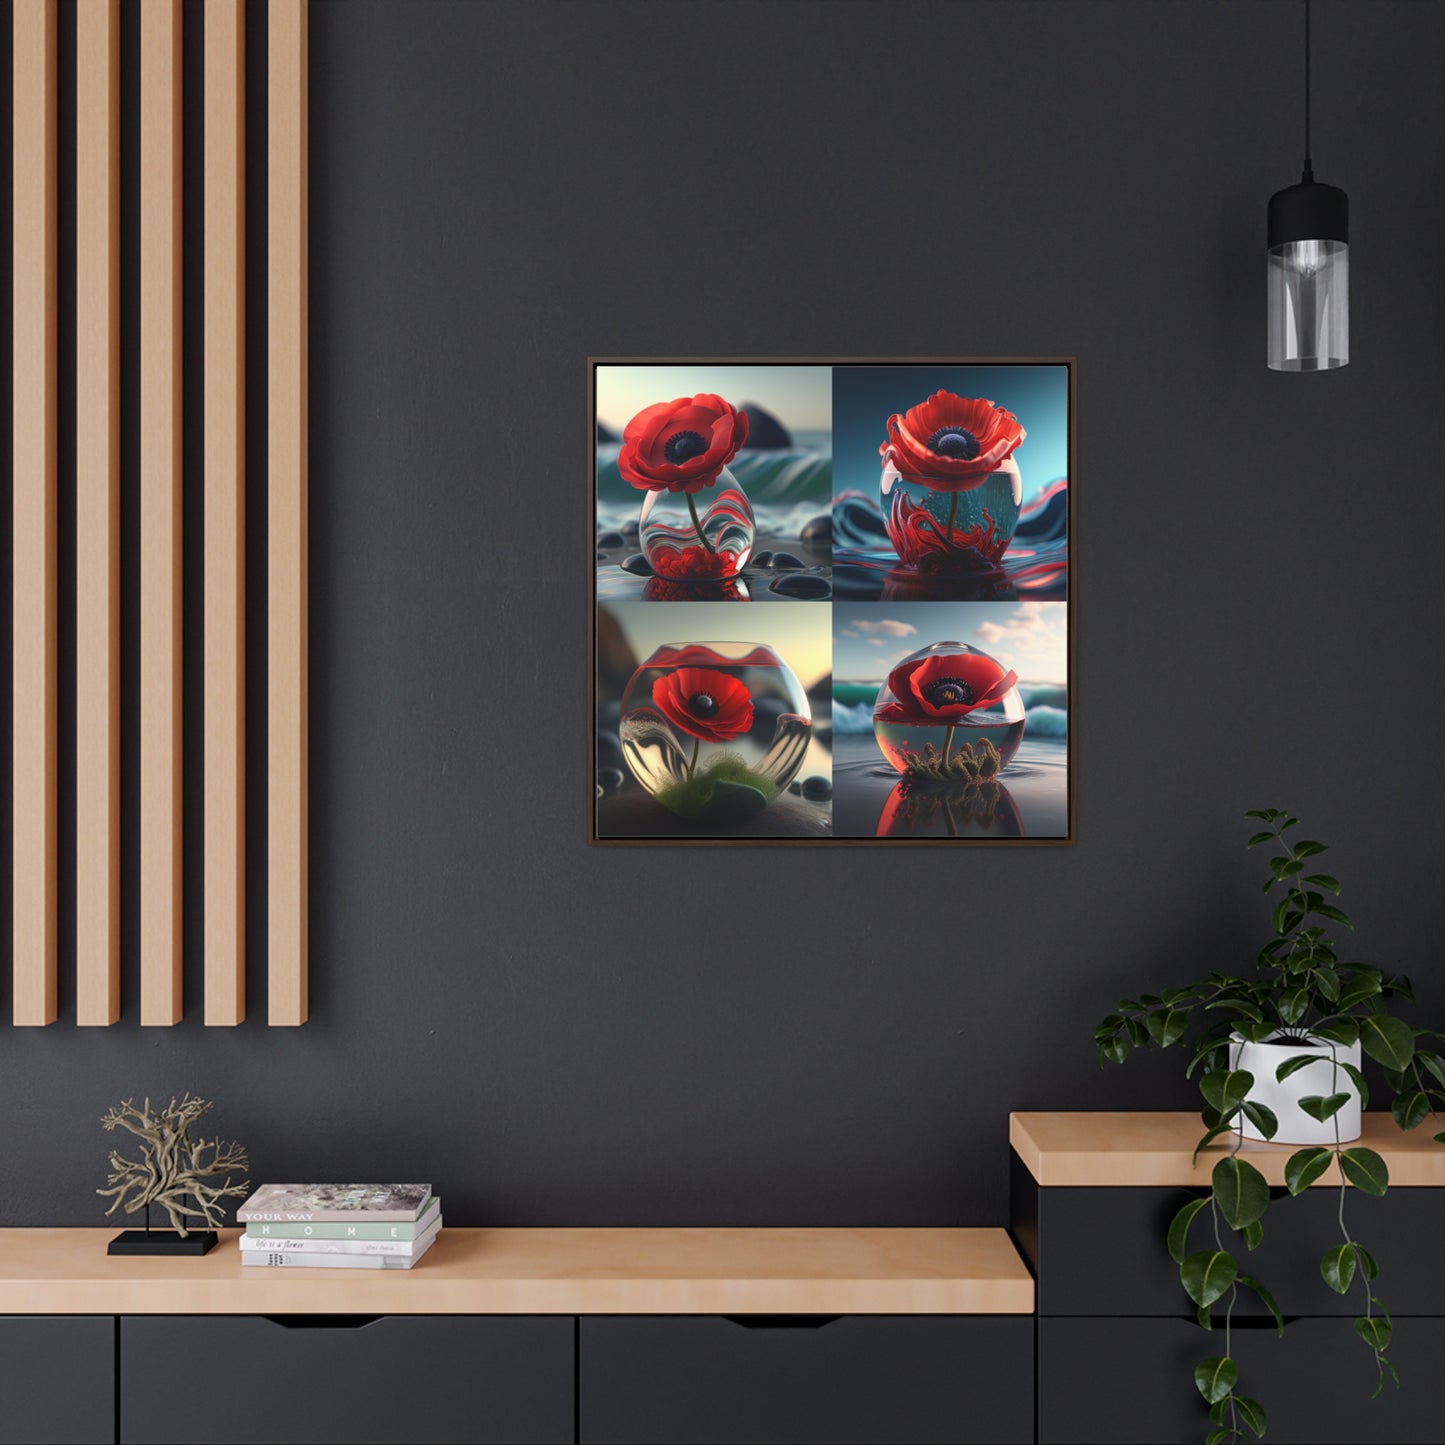 Gallery Canvas Wraps, Square Frame Red Anemone in a Vase 5